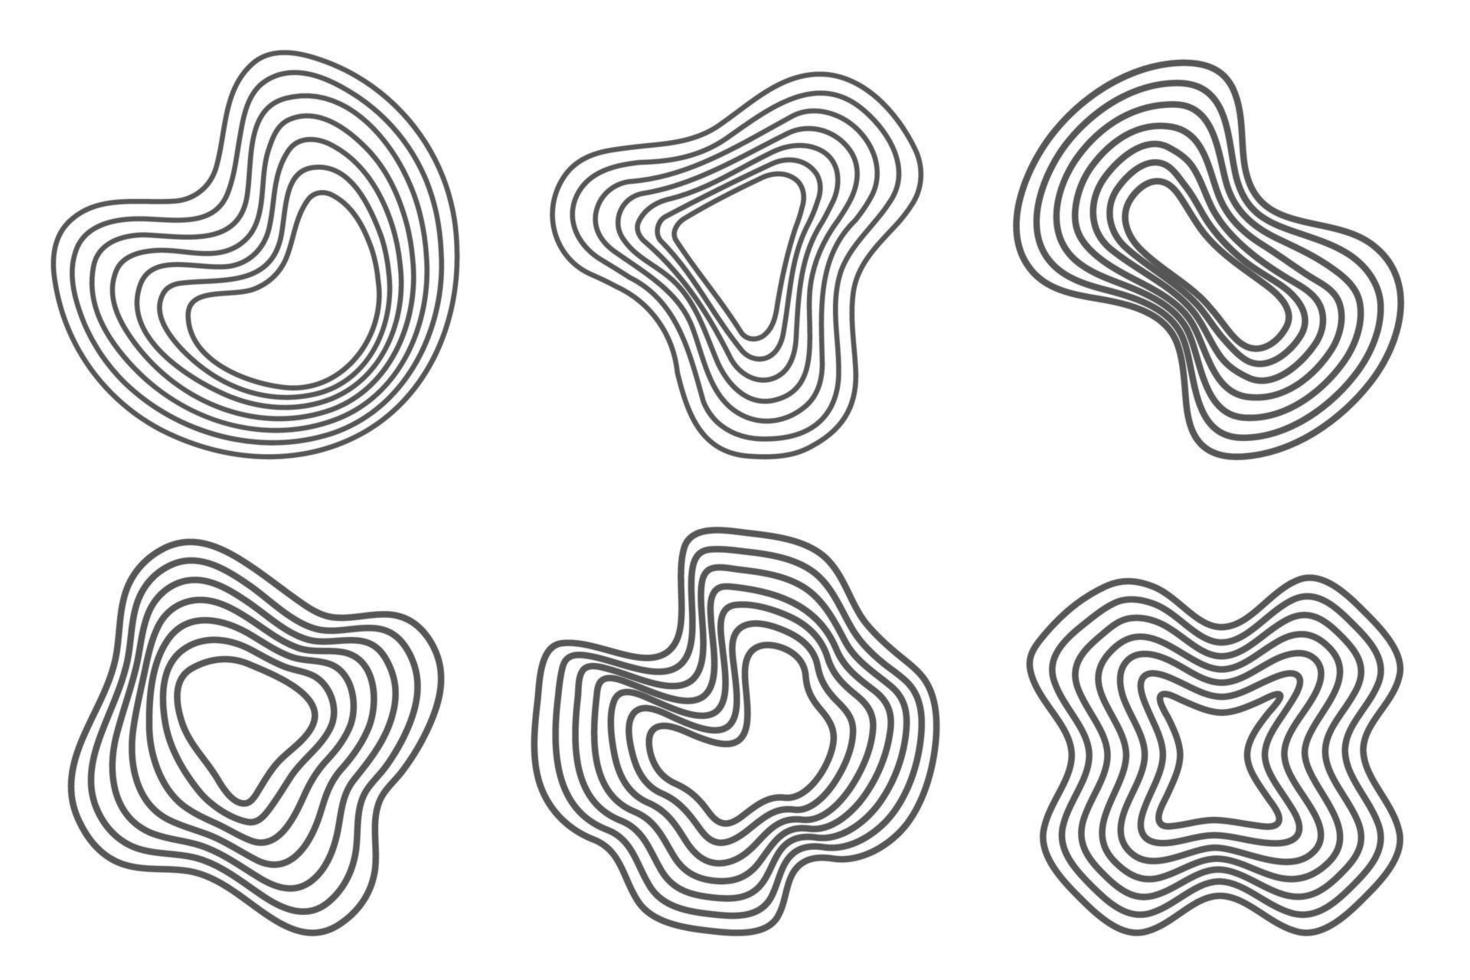 Tree rings organic patterns. Topography line circles. Nature wavy contour shapes. Topographic vector icons.